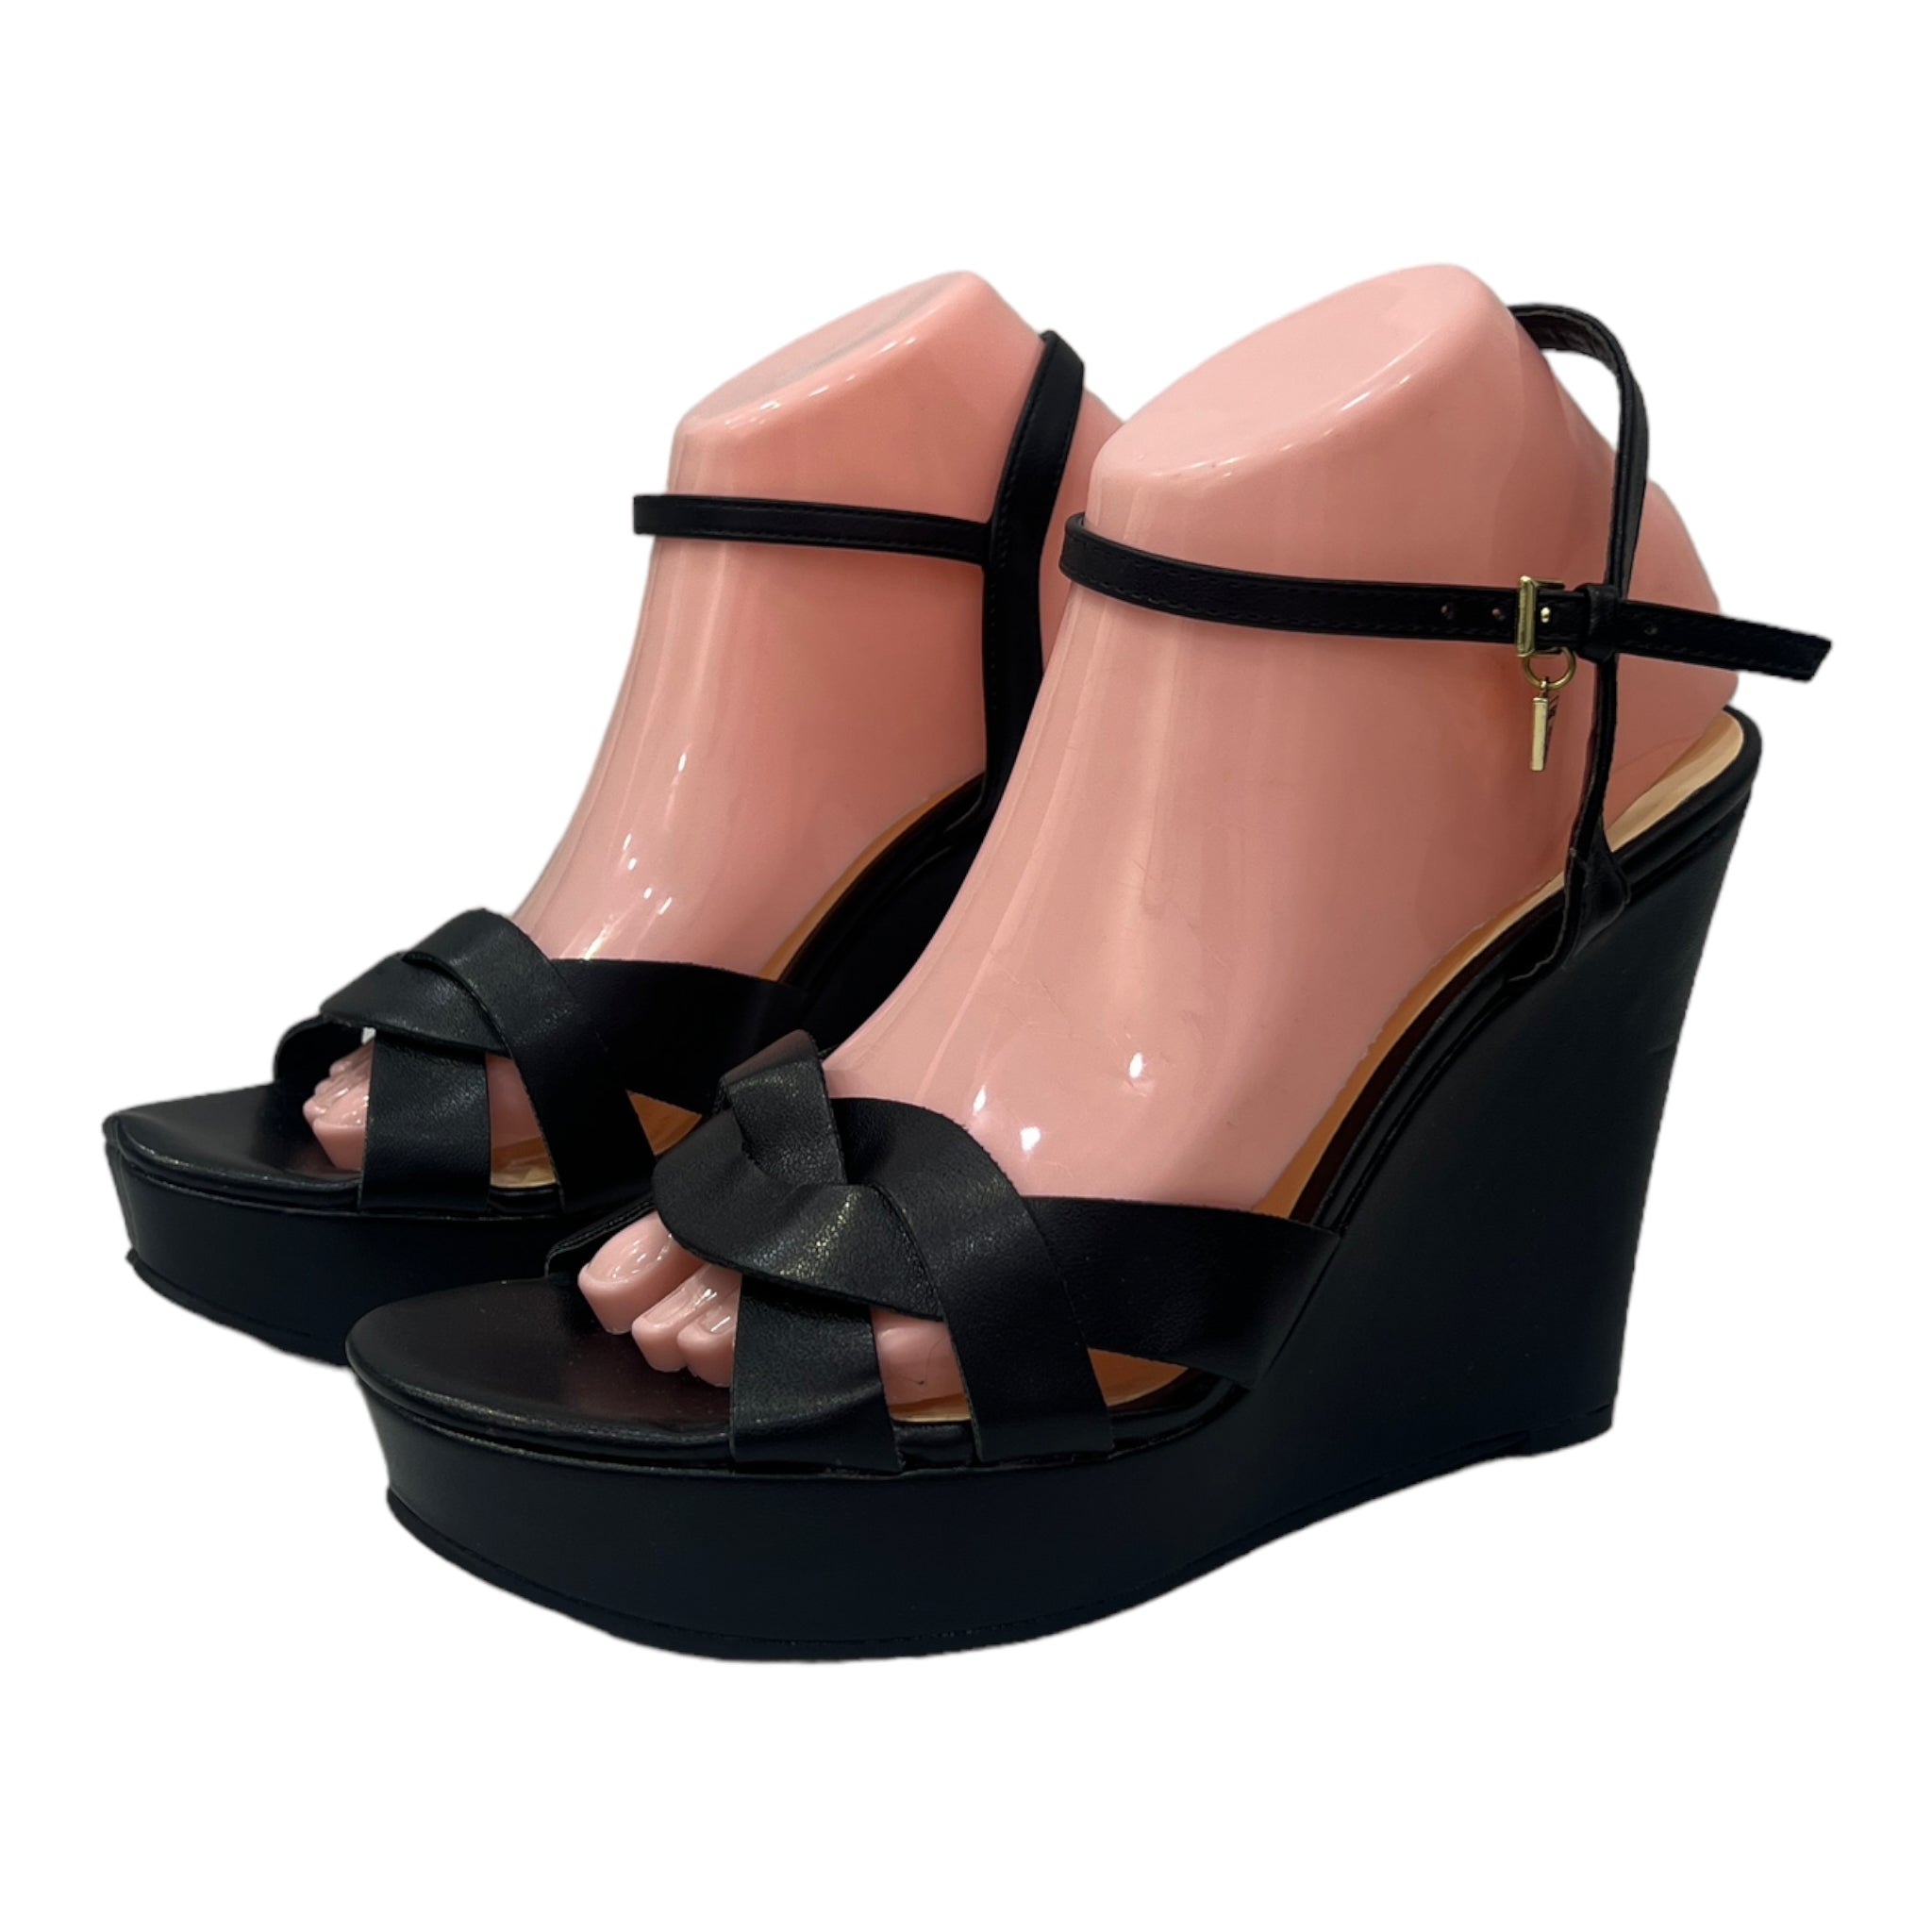 GUESS BLACK LEATHER WEDGE SANDAL